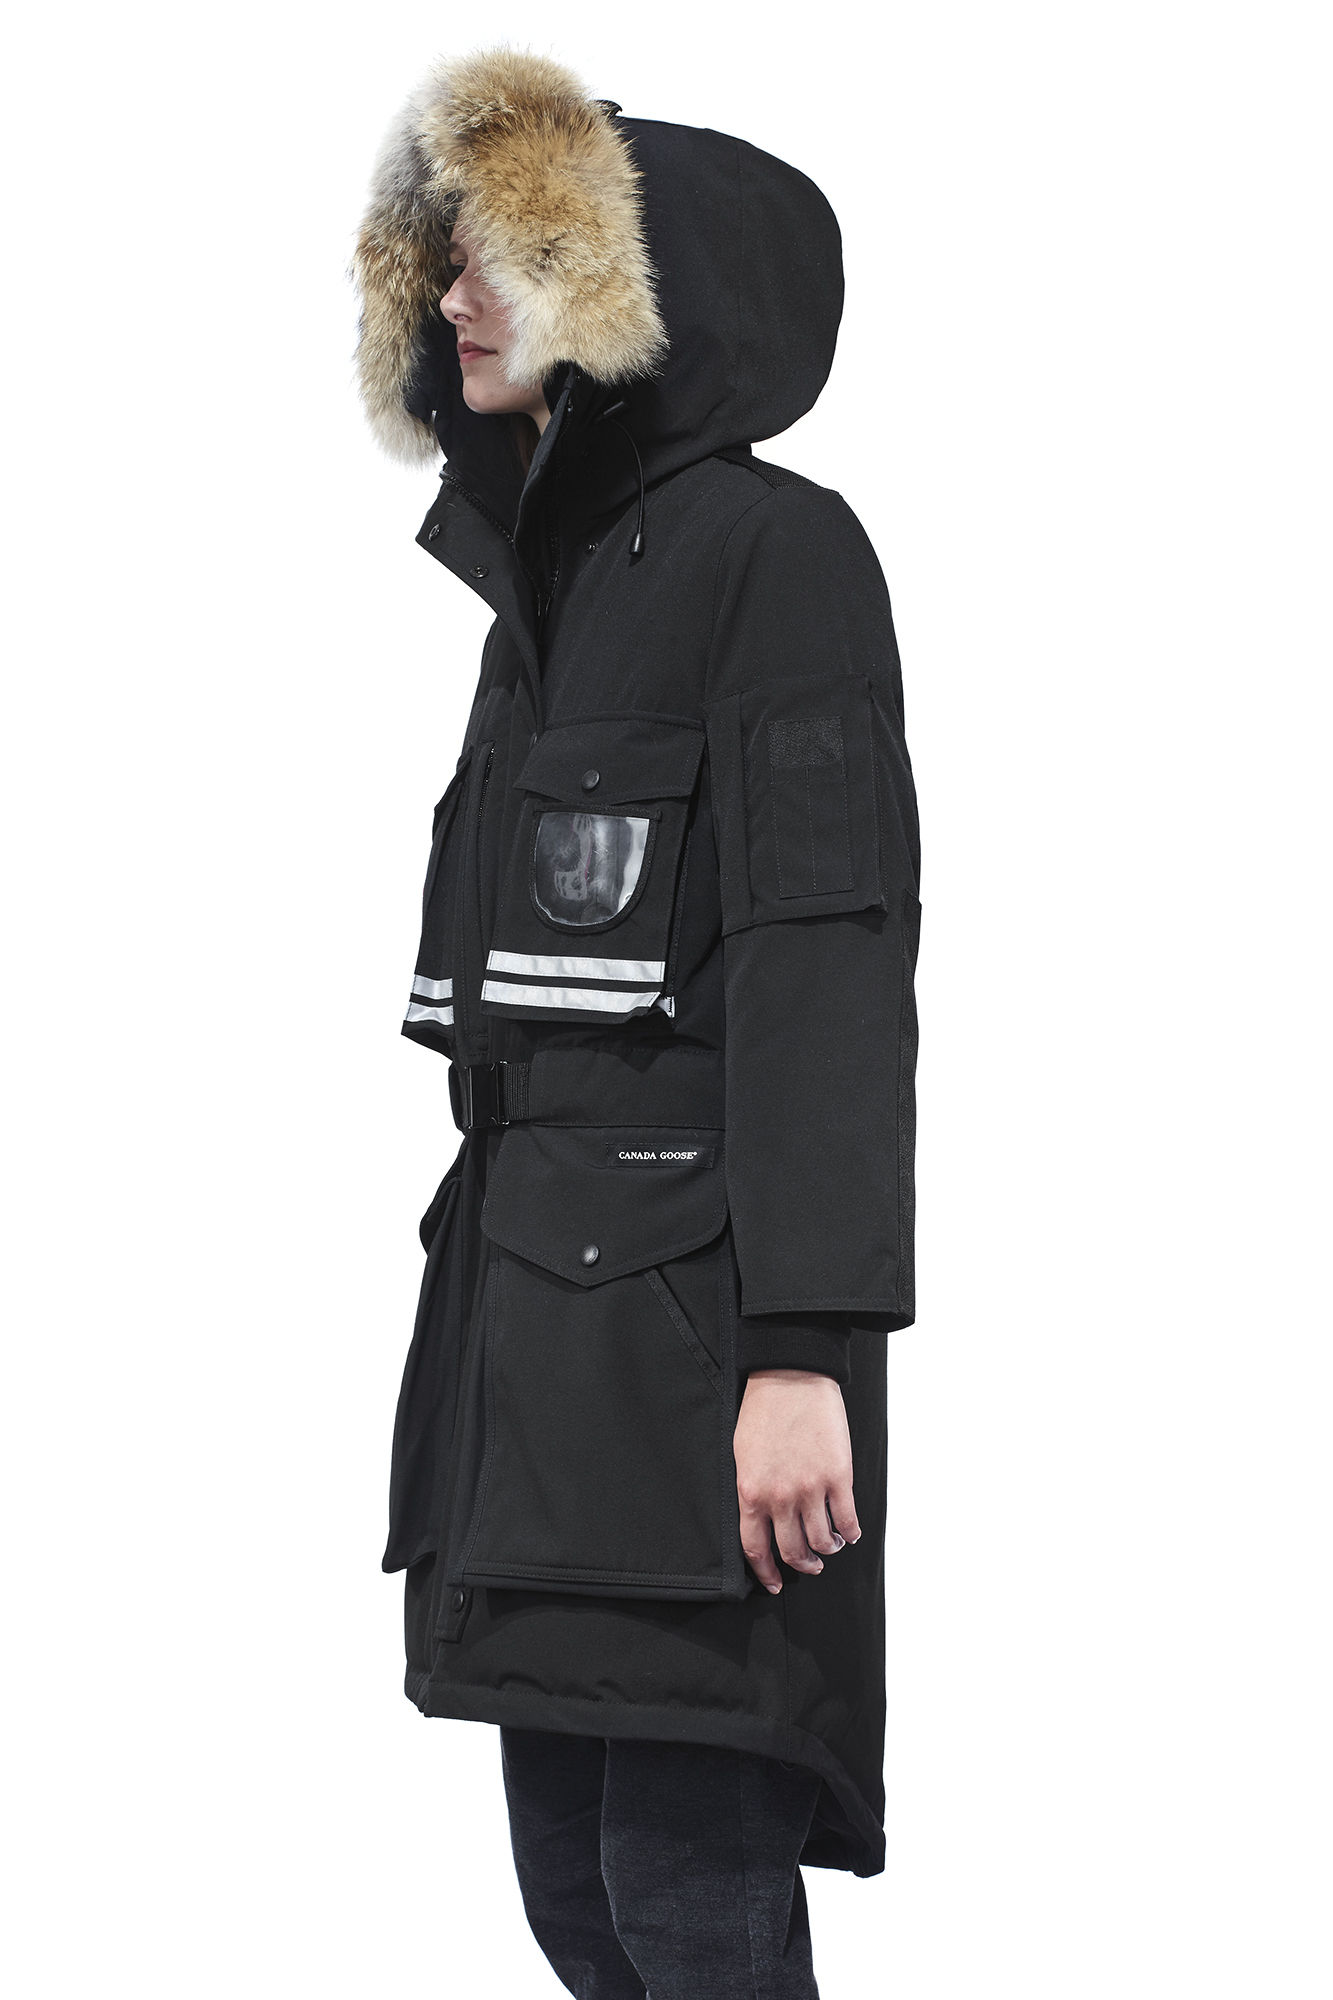 Canada Goose Expedition Parka Size Chart